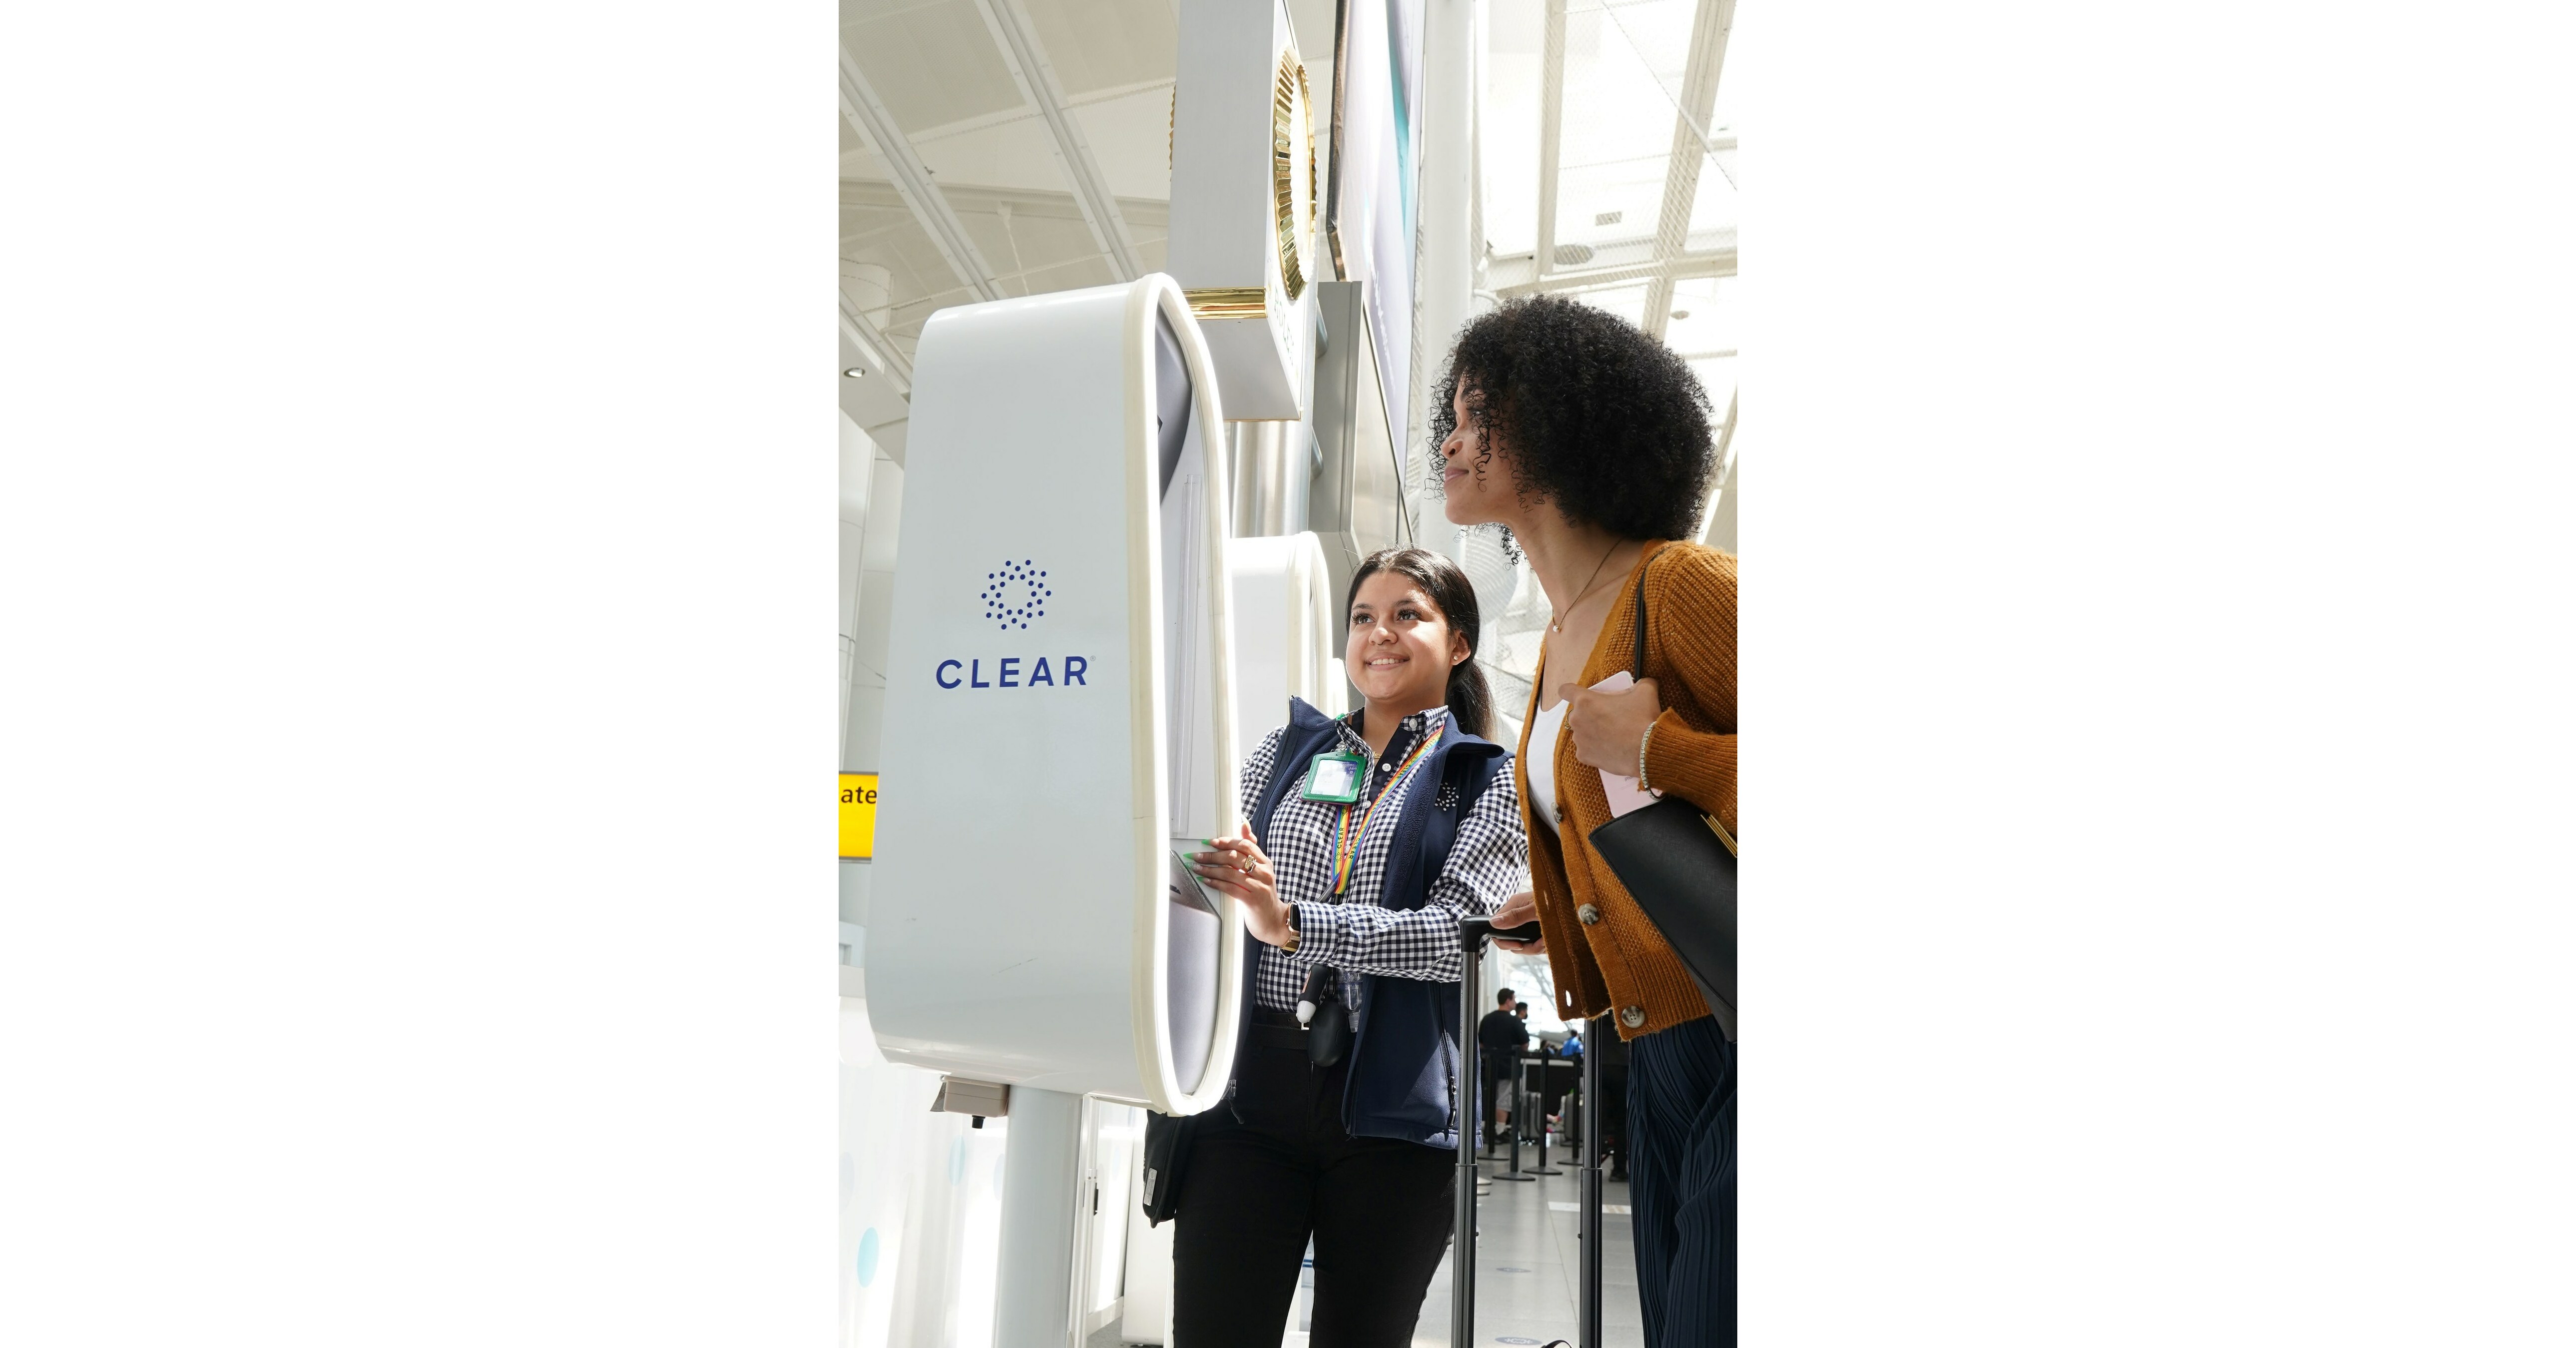 Timesaver! Alaska Airlines and CLEAR team up to make travel easier